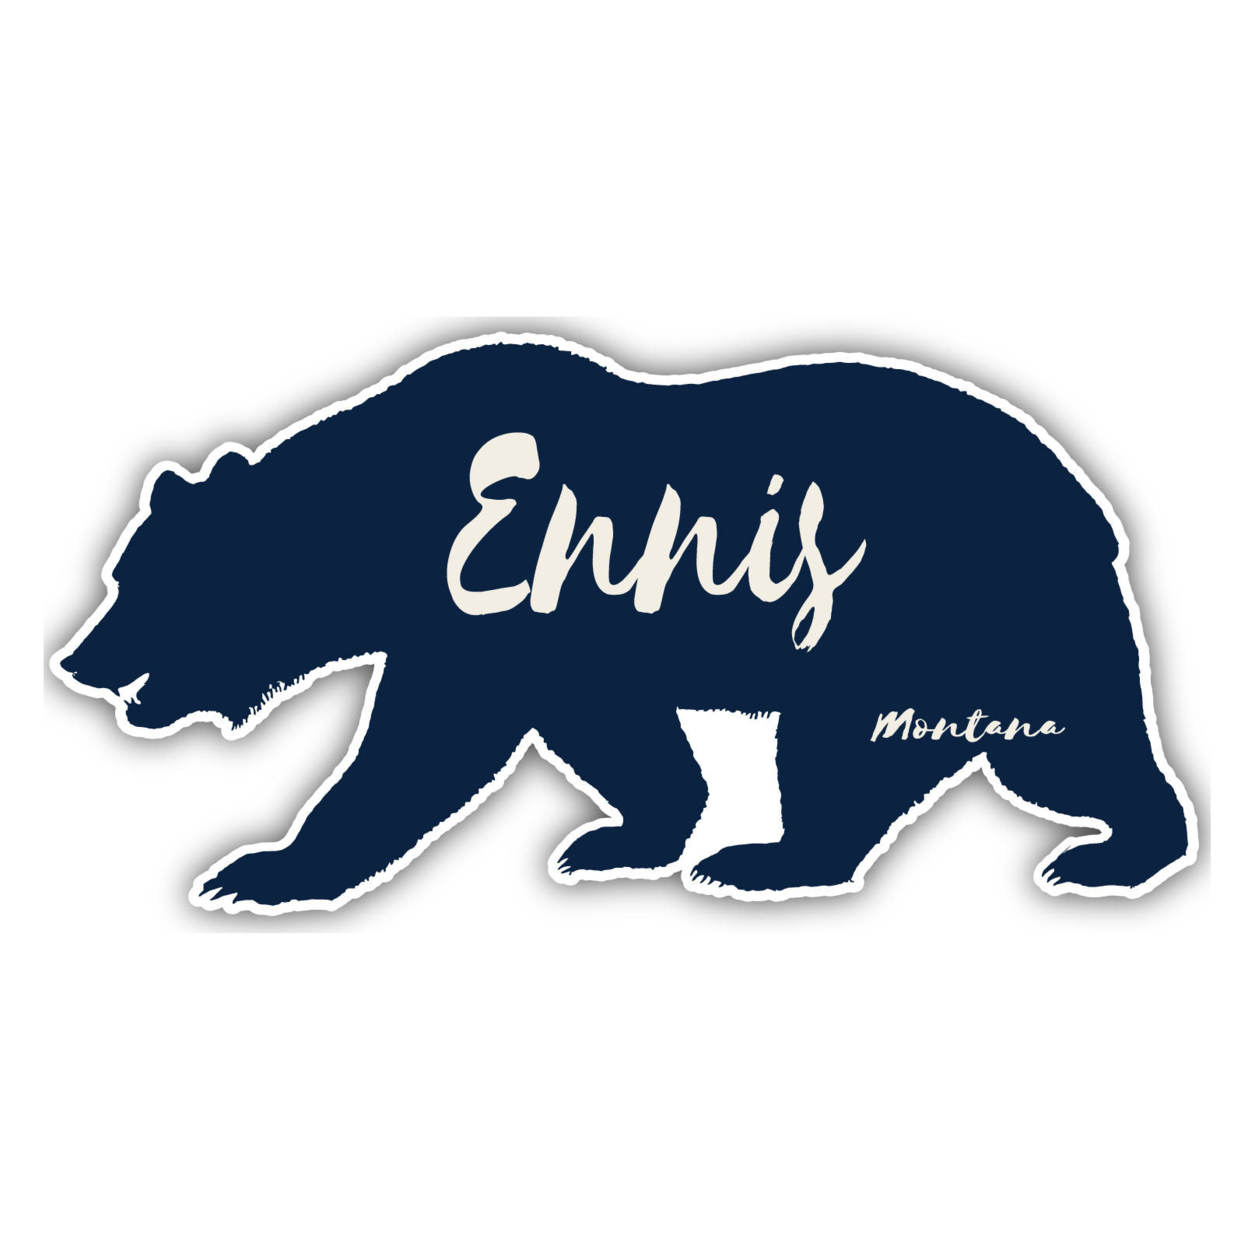 Ennis Montana Souvenir Decorative Stickers (Choose Theme And Size) - 4-Pack, 10-Inch, Great Outdoors